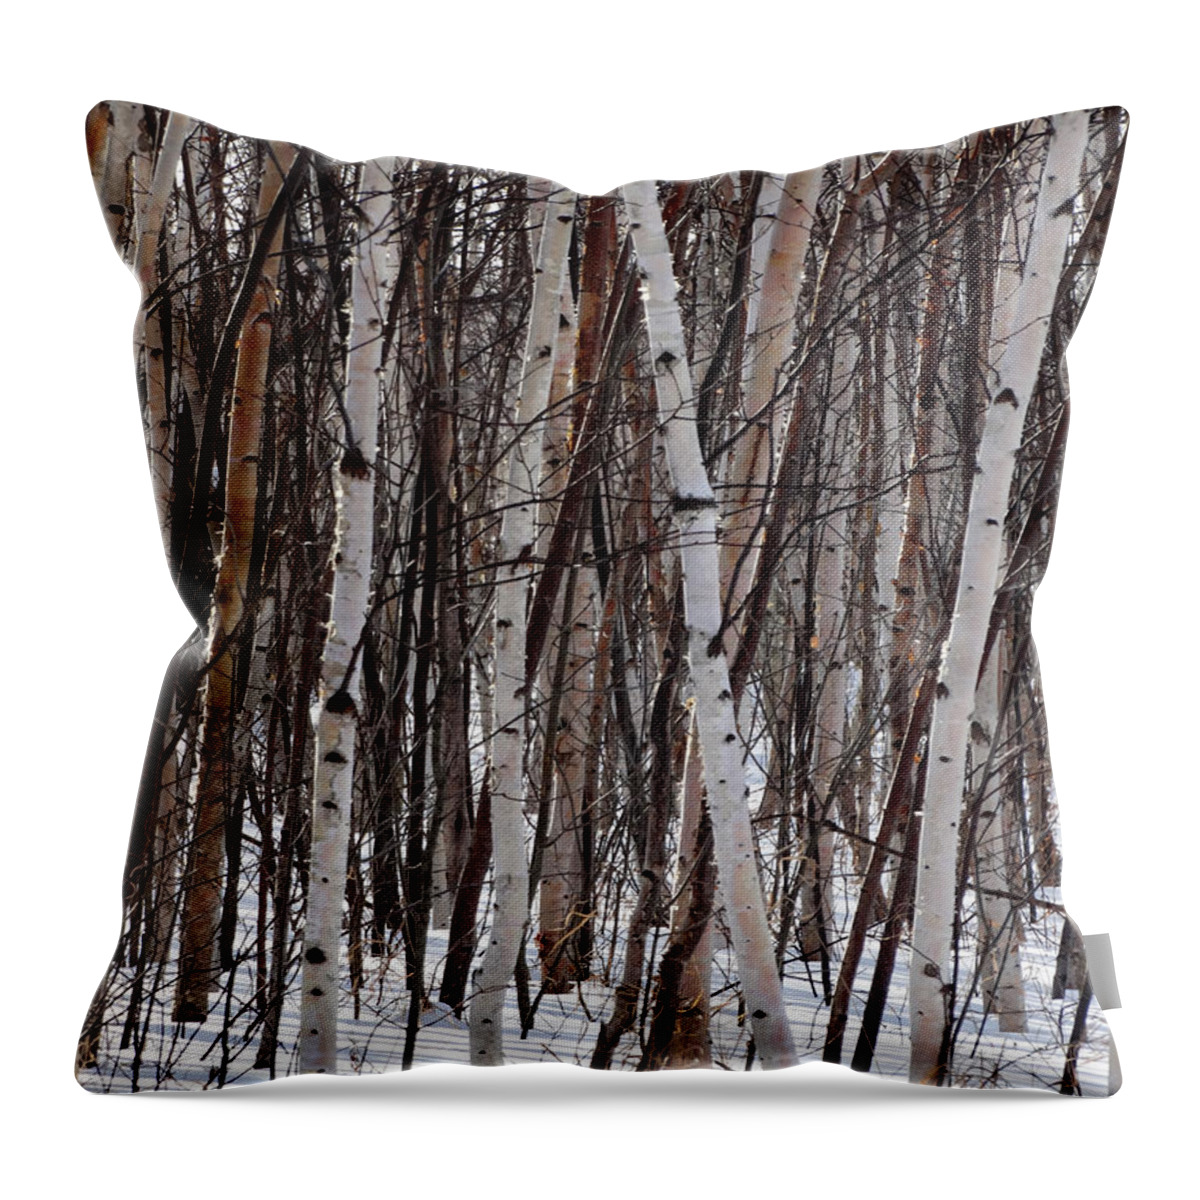 Birch Throw Pillow featuring the photograph Winter Birch Thicket by David T Wilkinson